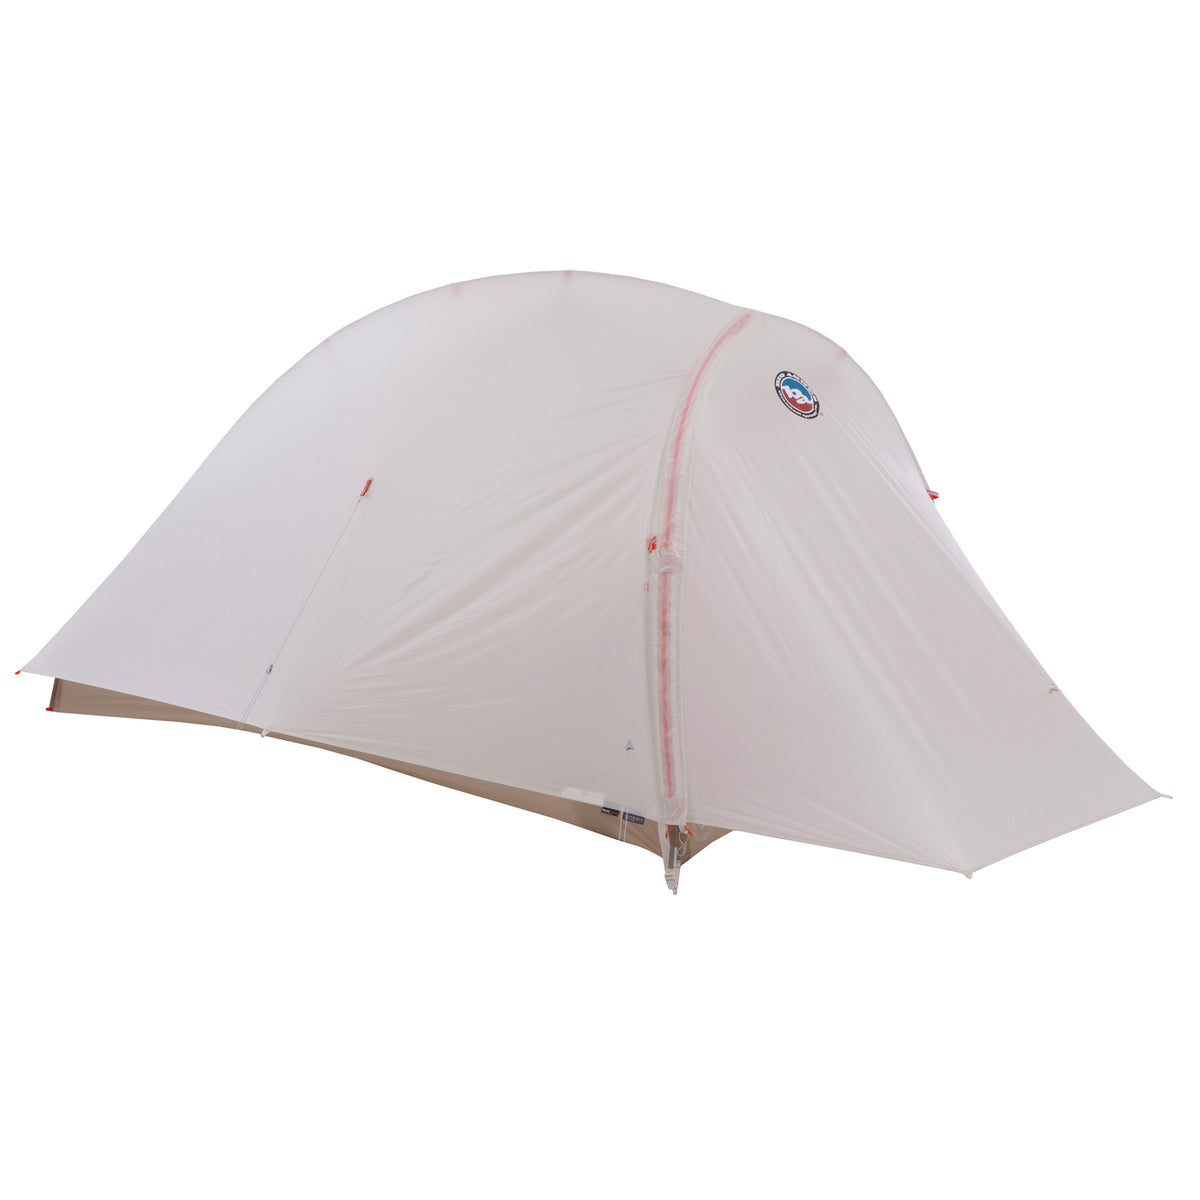 the big agnes fly creek HV UL 1 solution dye tent with fly on and door zipped